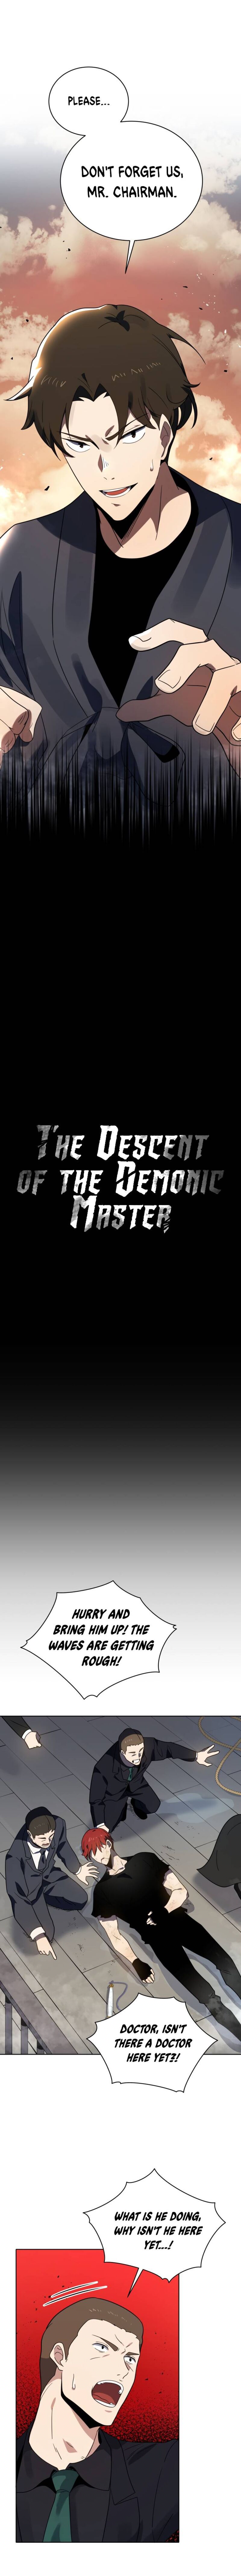 the_descent_of_the_demonic_master_140_3